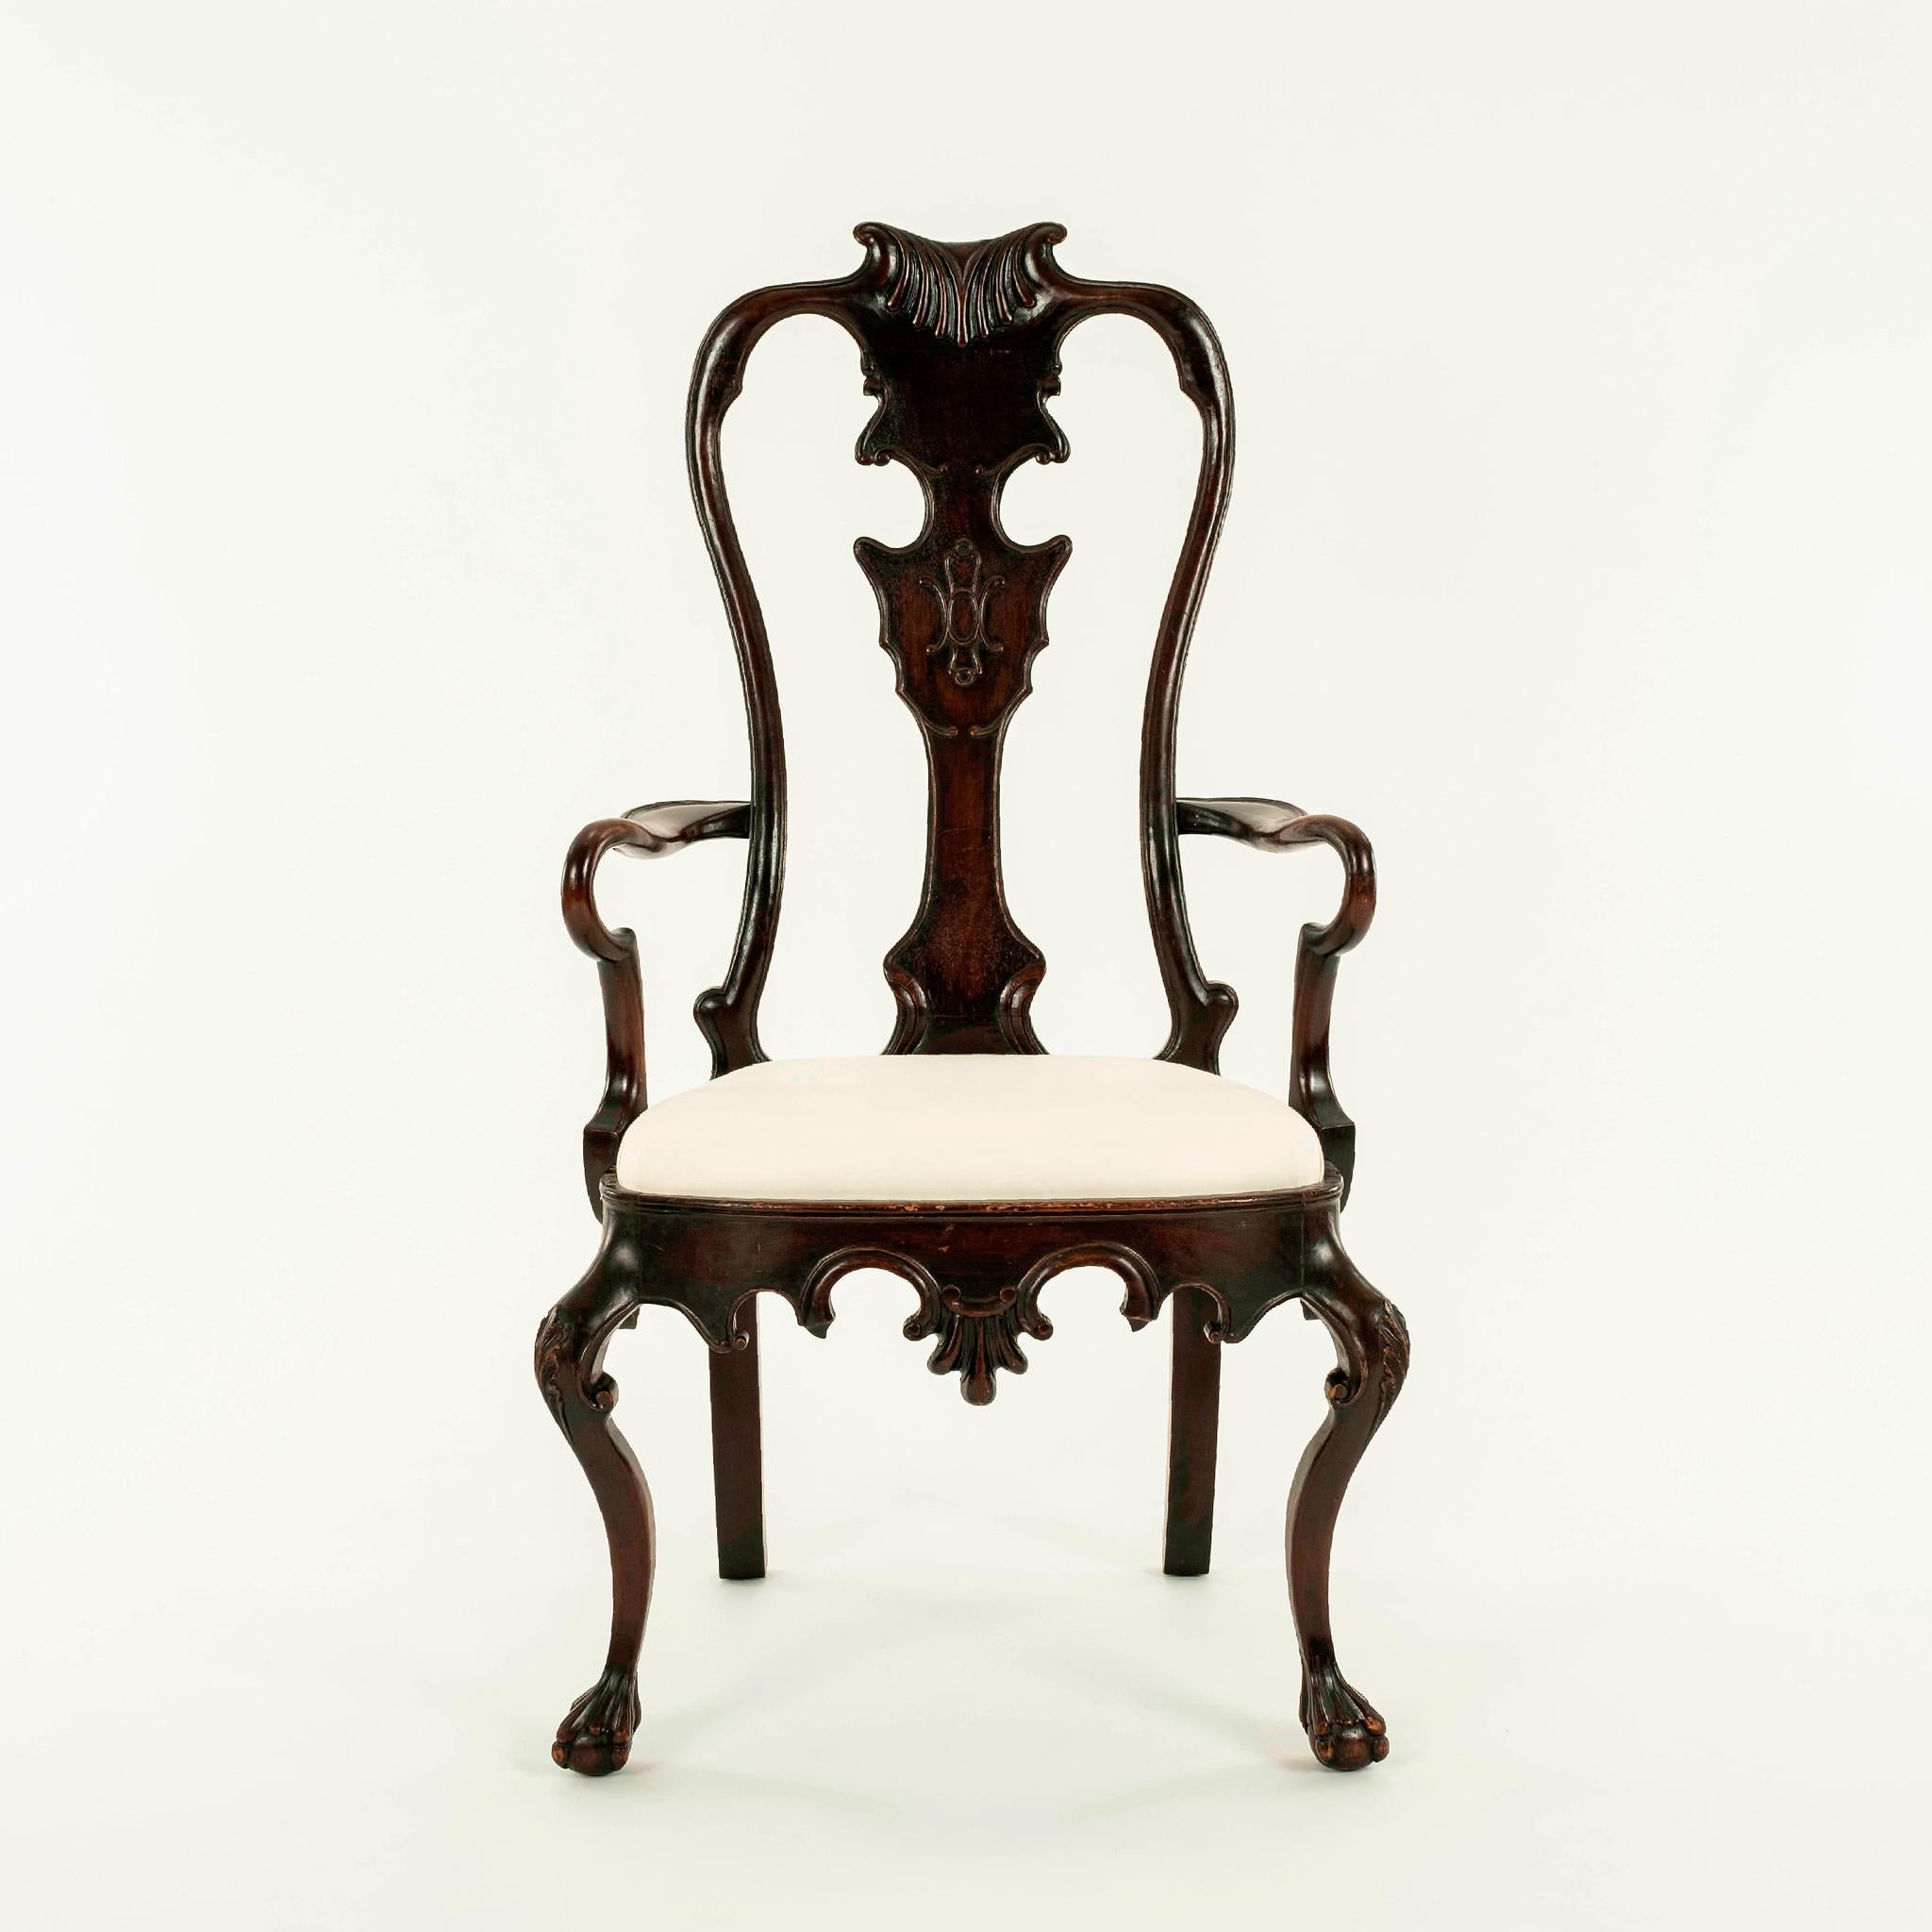 Hand-Carved 19th Century Portuguese Arm Chair